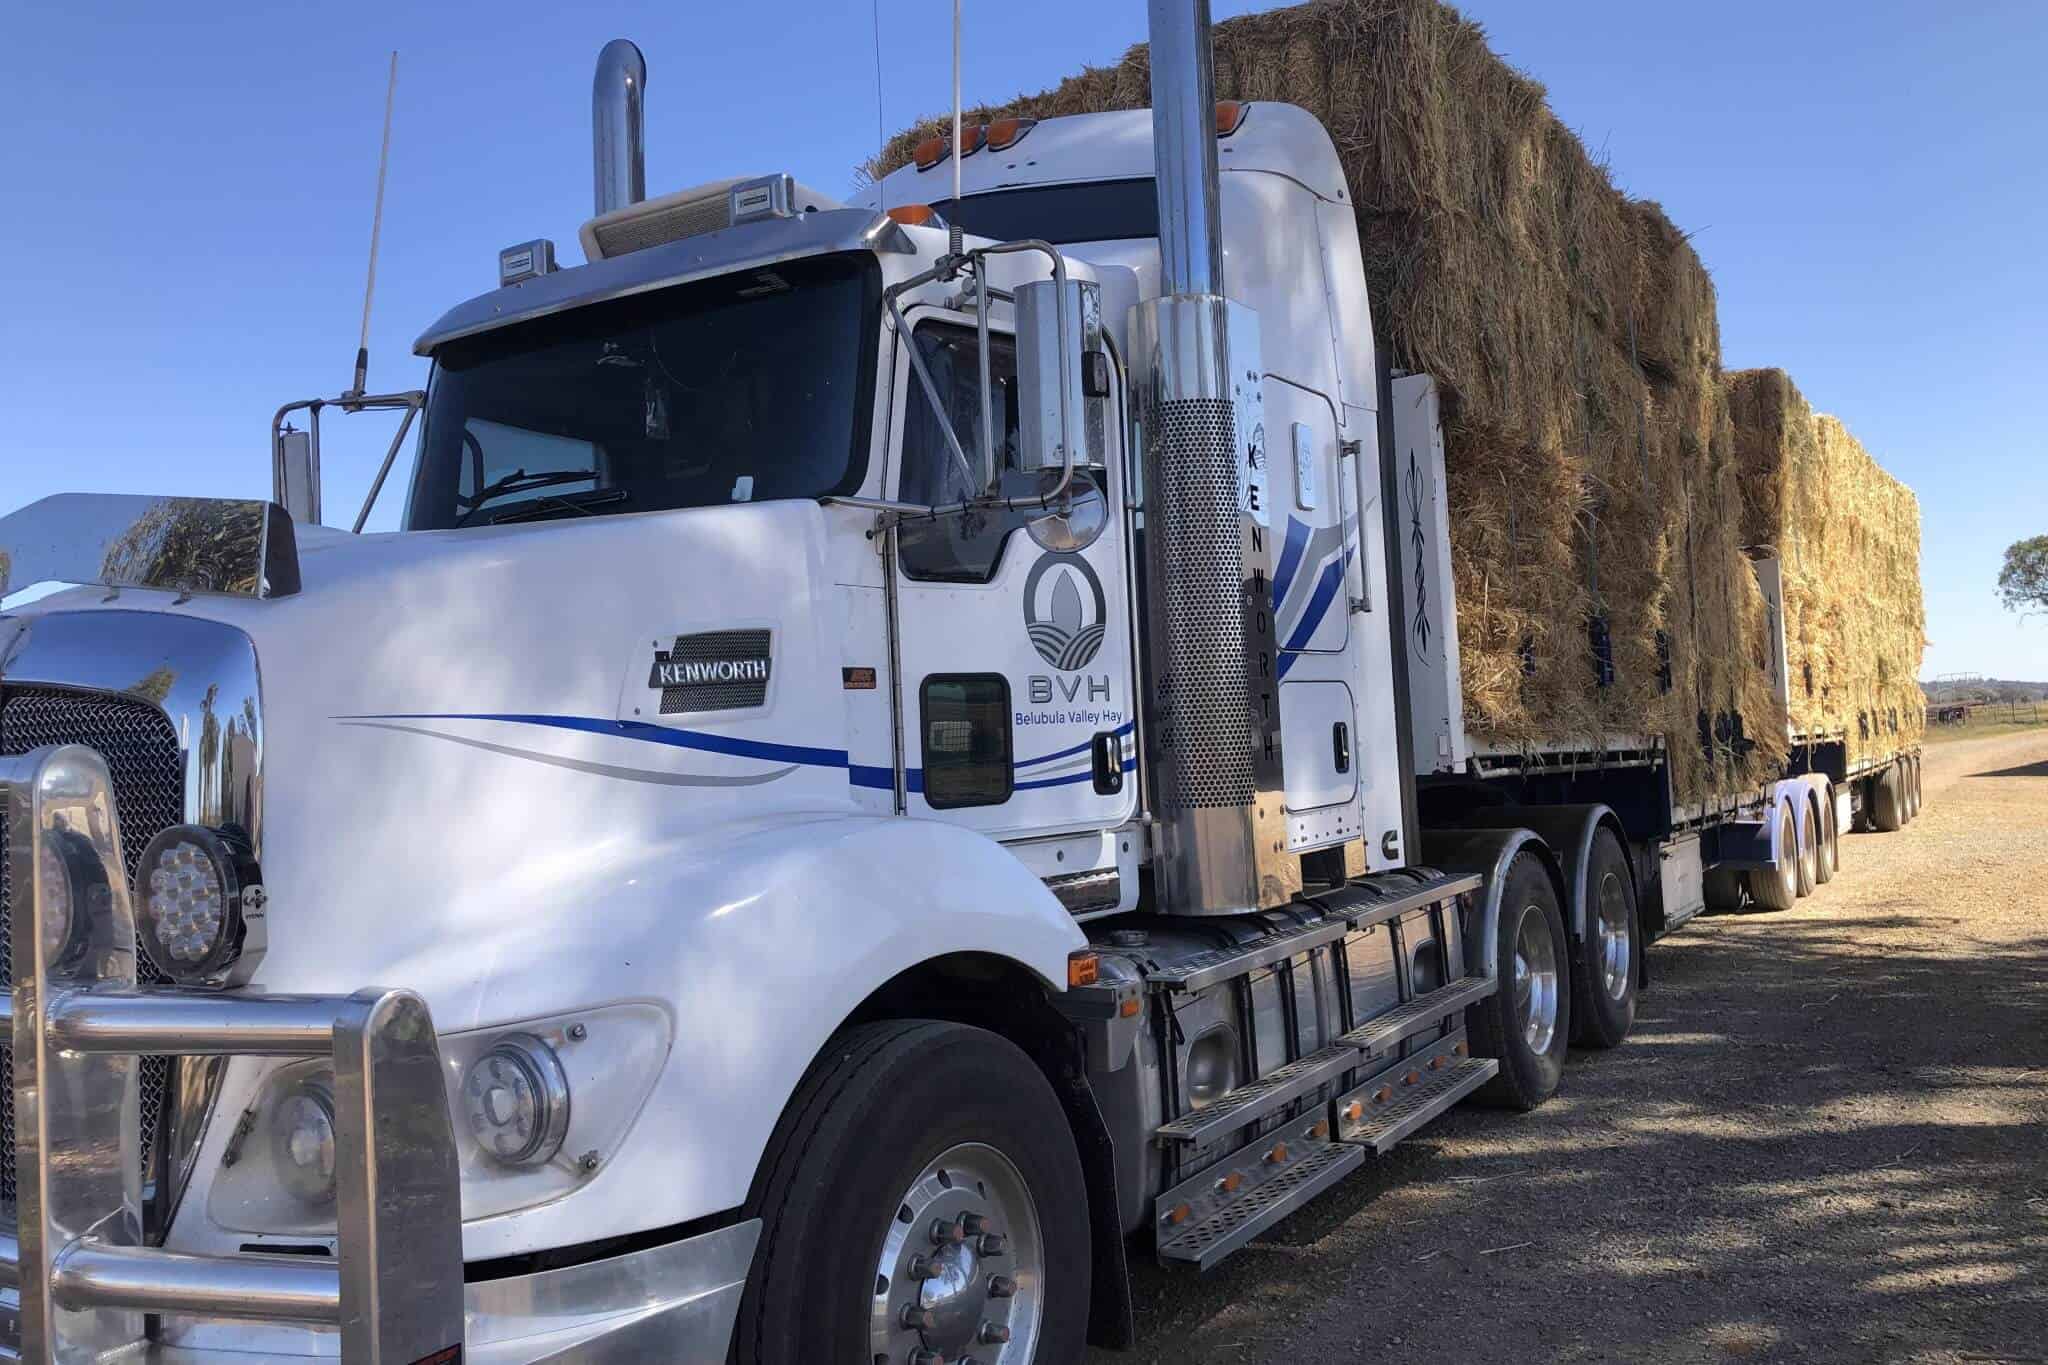 Bales of hay are stacked on a semi-trailer truck that has the Belubula Valley Hay logo on the passenger's door